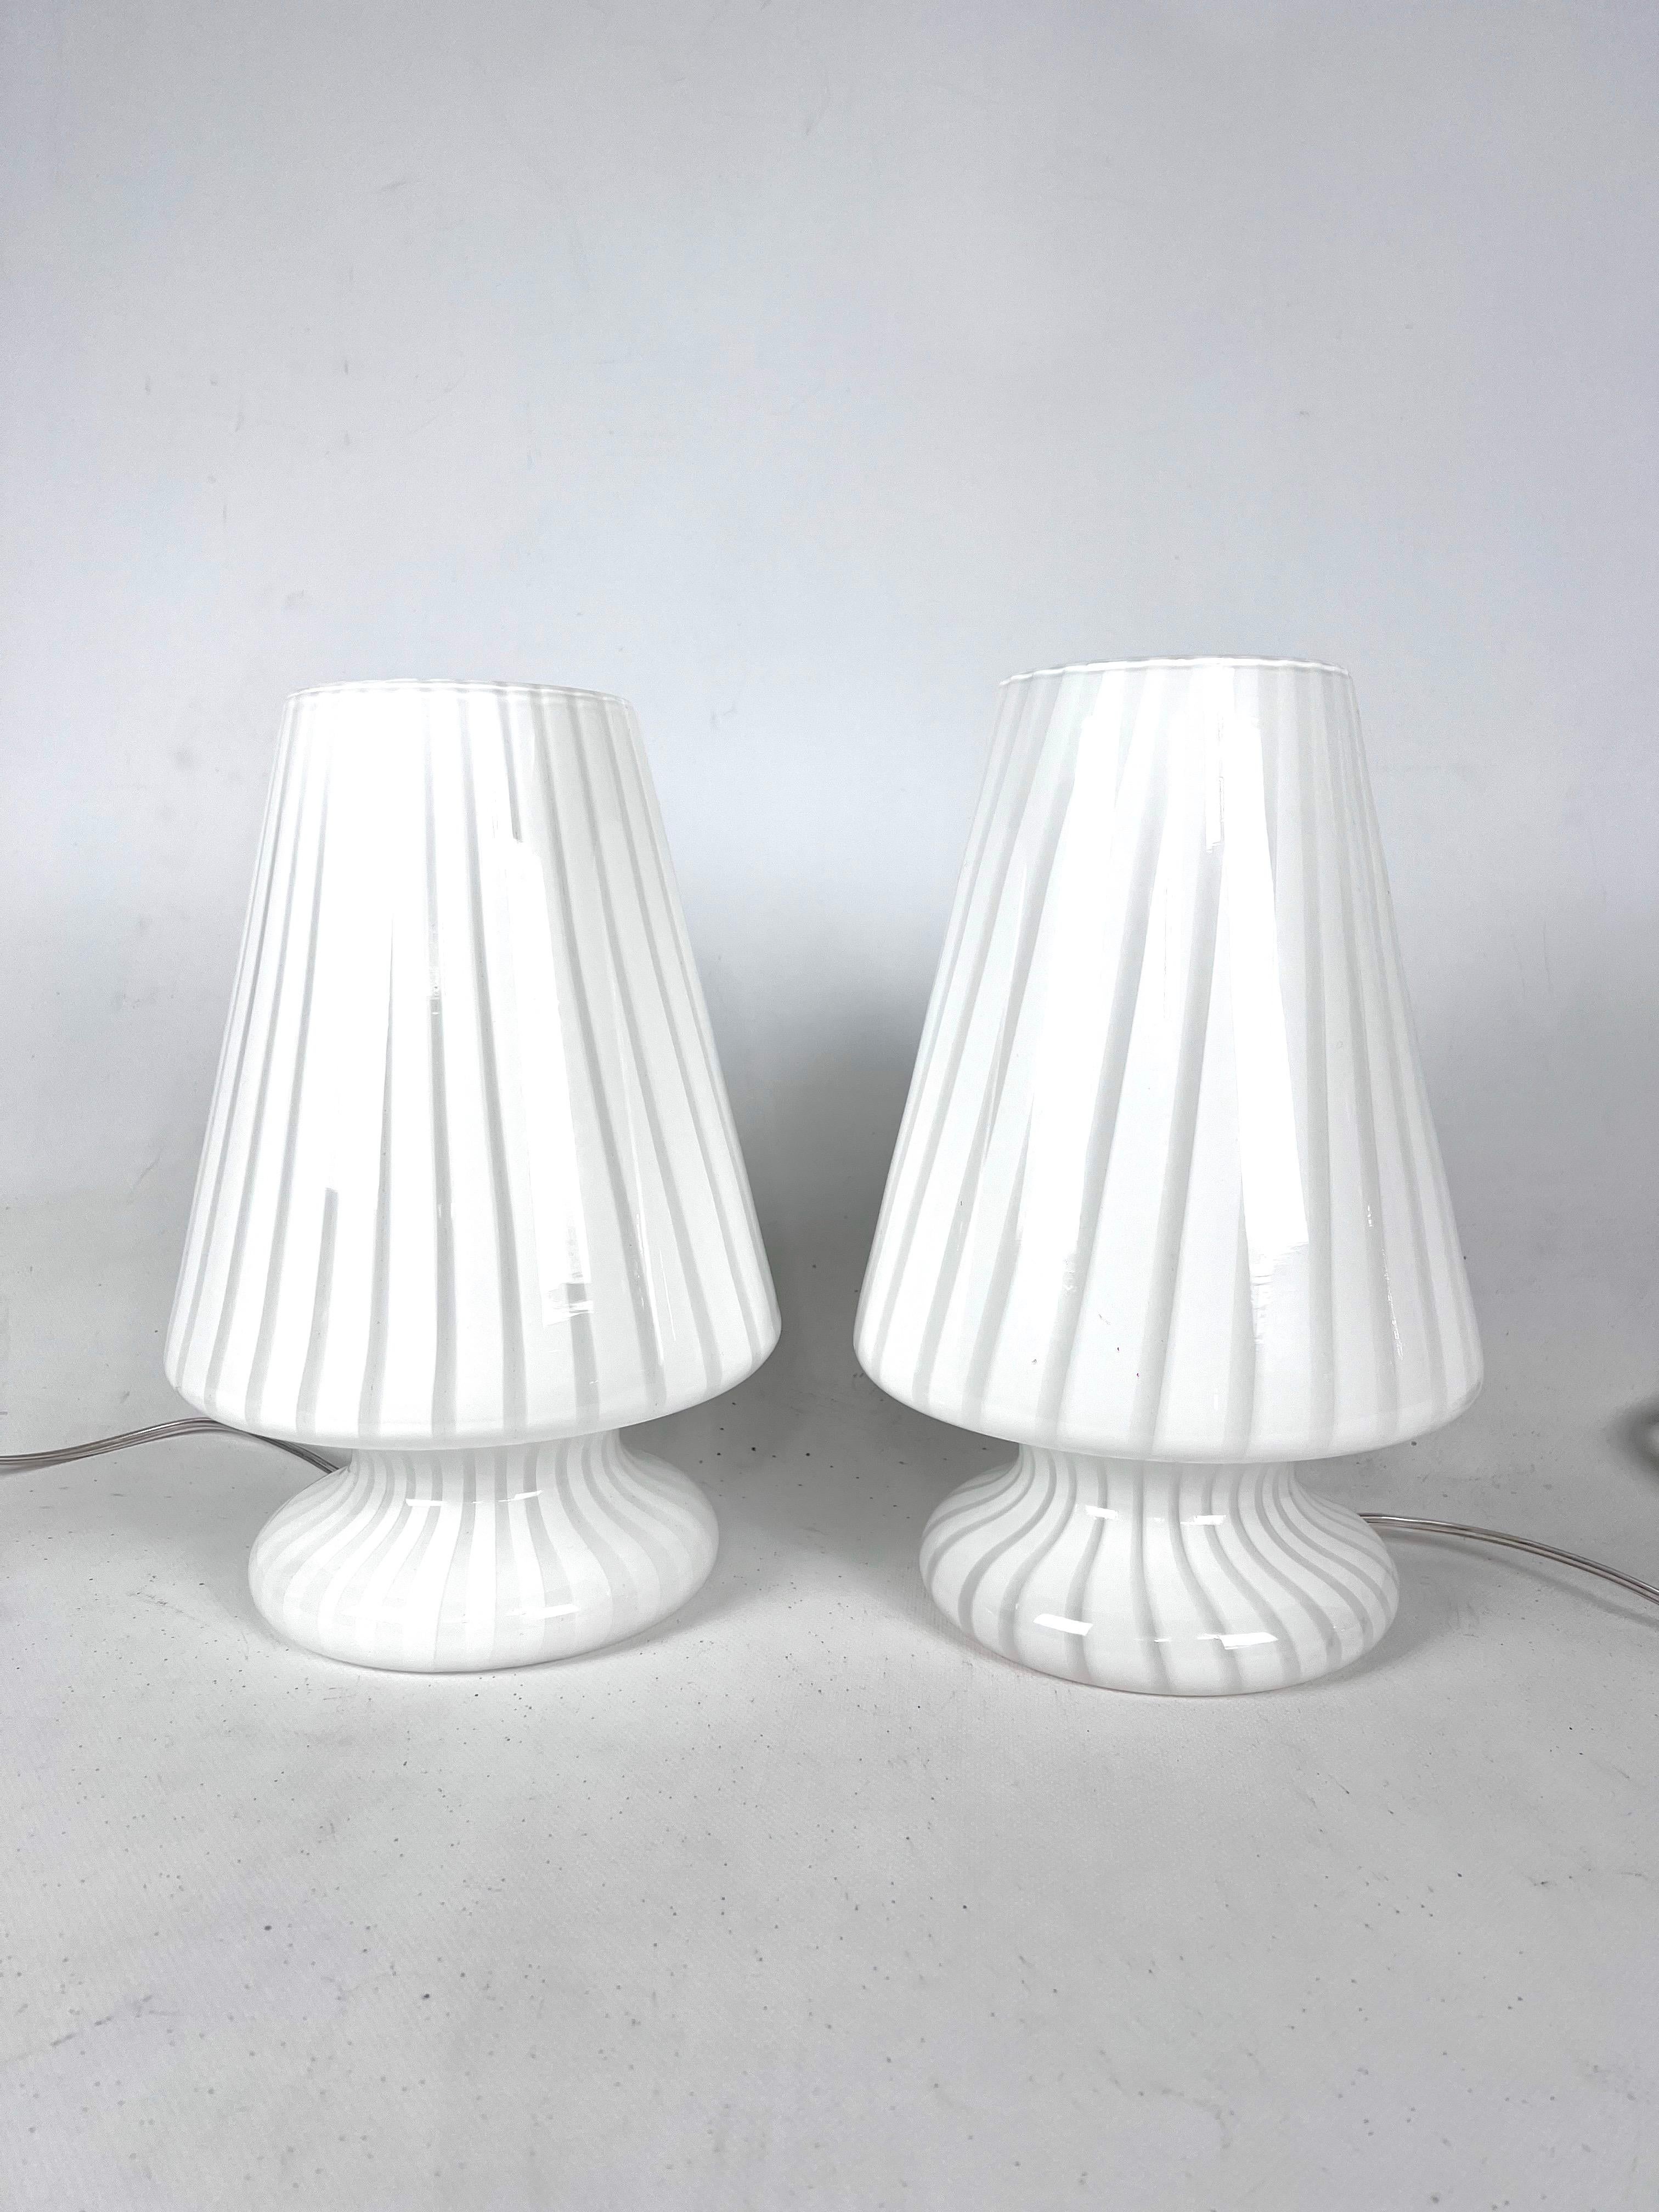 Great vintage condition with slight trace of age and use for this set of two Murano glass table lamps produced in Italy during the 70s. New wiring. Full working with EU standard, adaptable on demand for USA standard.